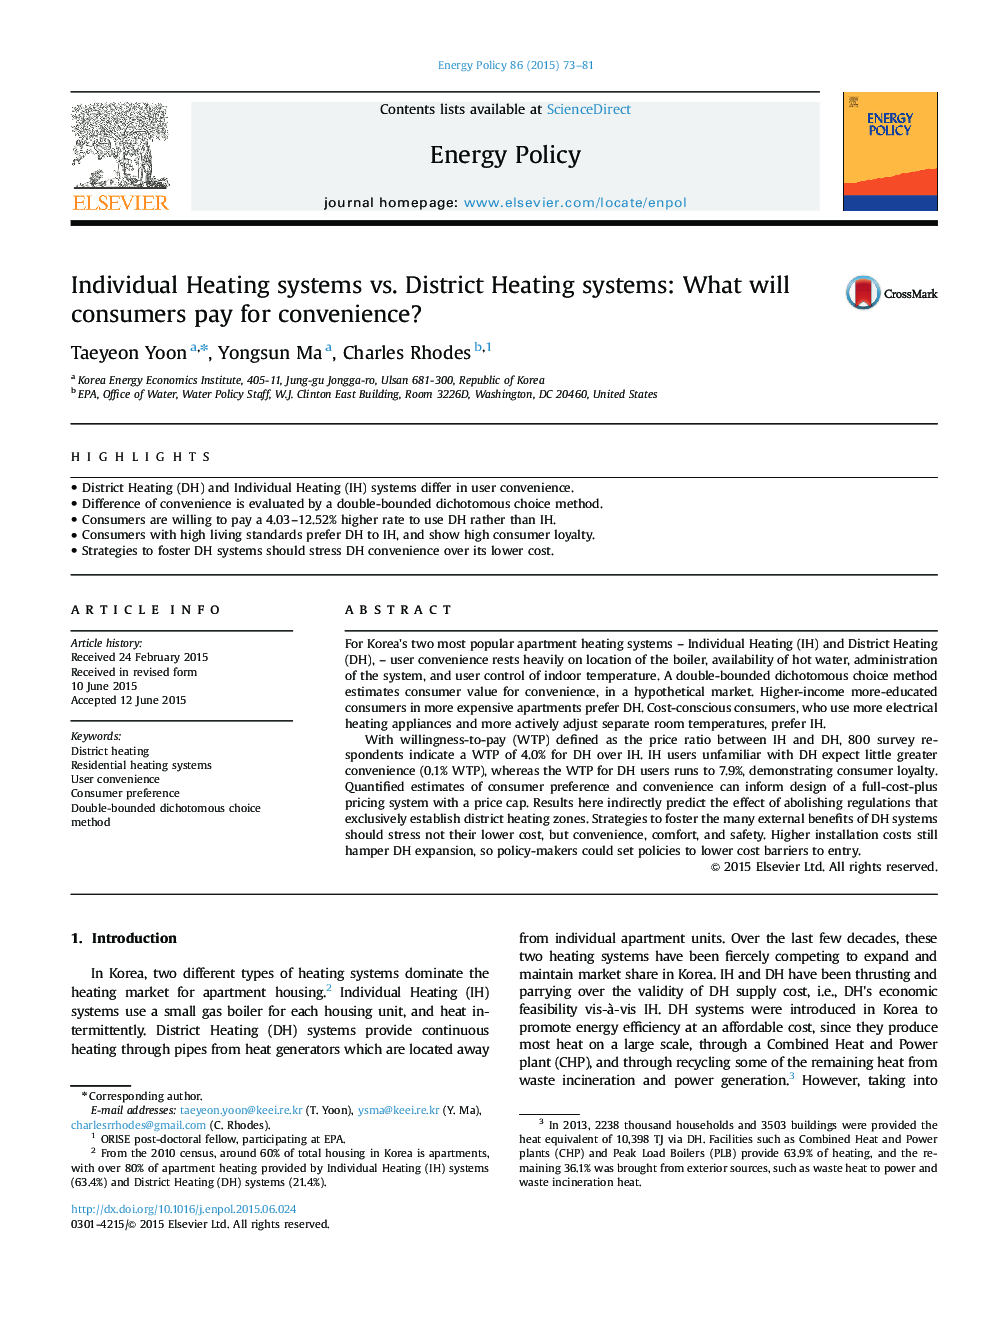 Individual Heating systems vs. District Heating systems: What will consumers pay for convenience?